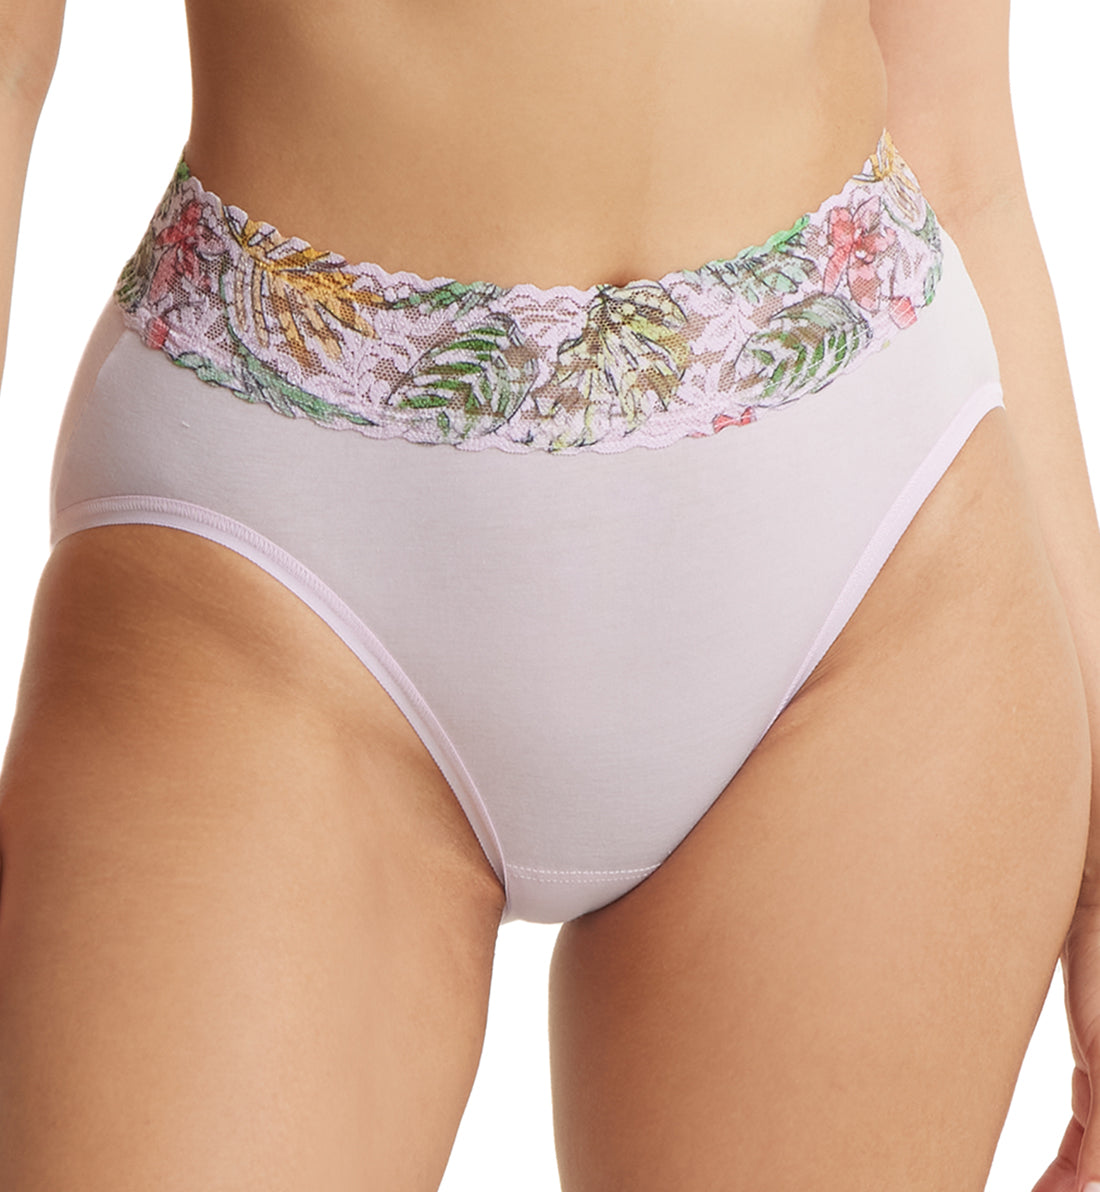 Hanky Panky Cotton-Spandex French Brief (892441),Small,Island Pink/Lovely Leaves - Lovely Leaves,Small